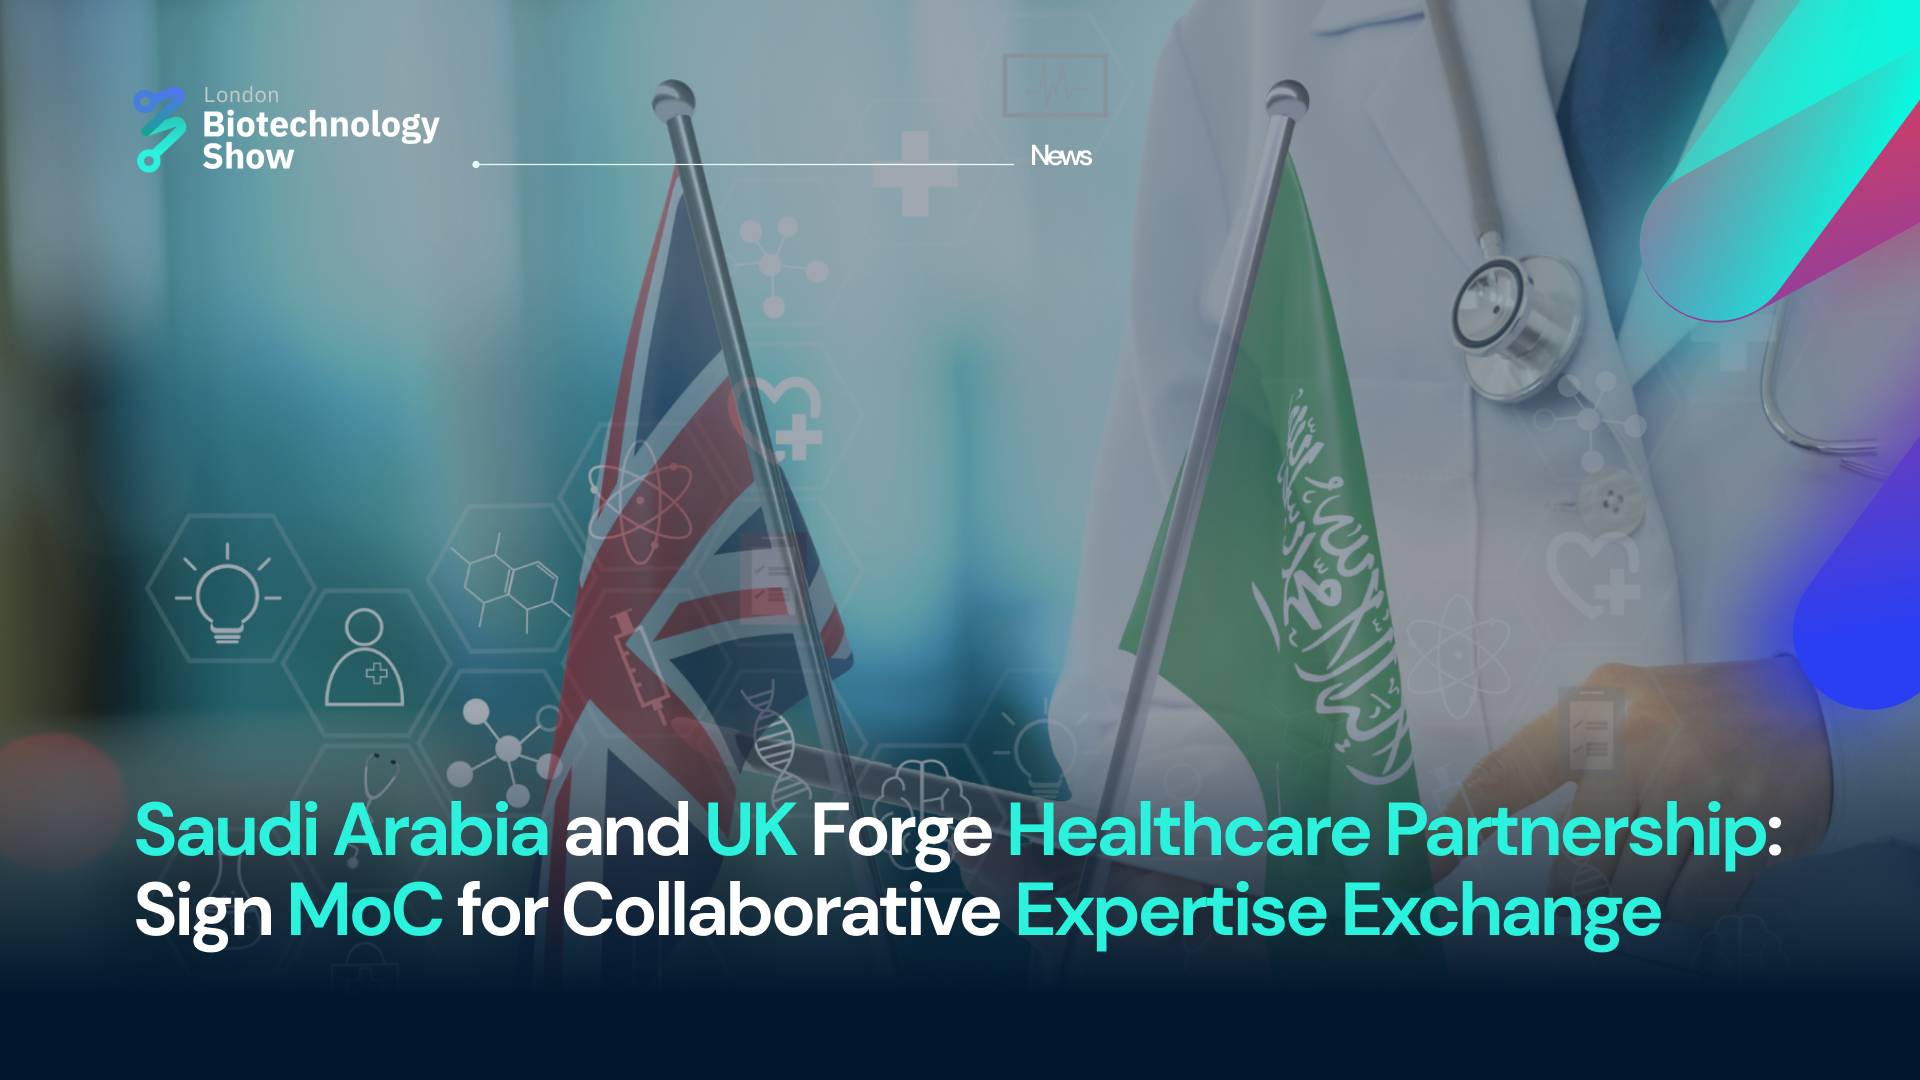 Saudi Arabia and UK Forge Healthcare Partnership: Sign MoC for Collaborative Expertise Exchange